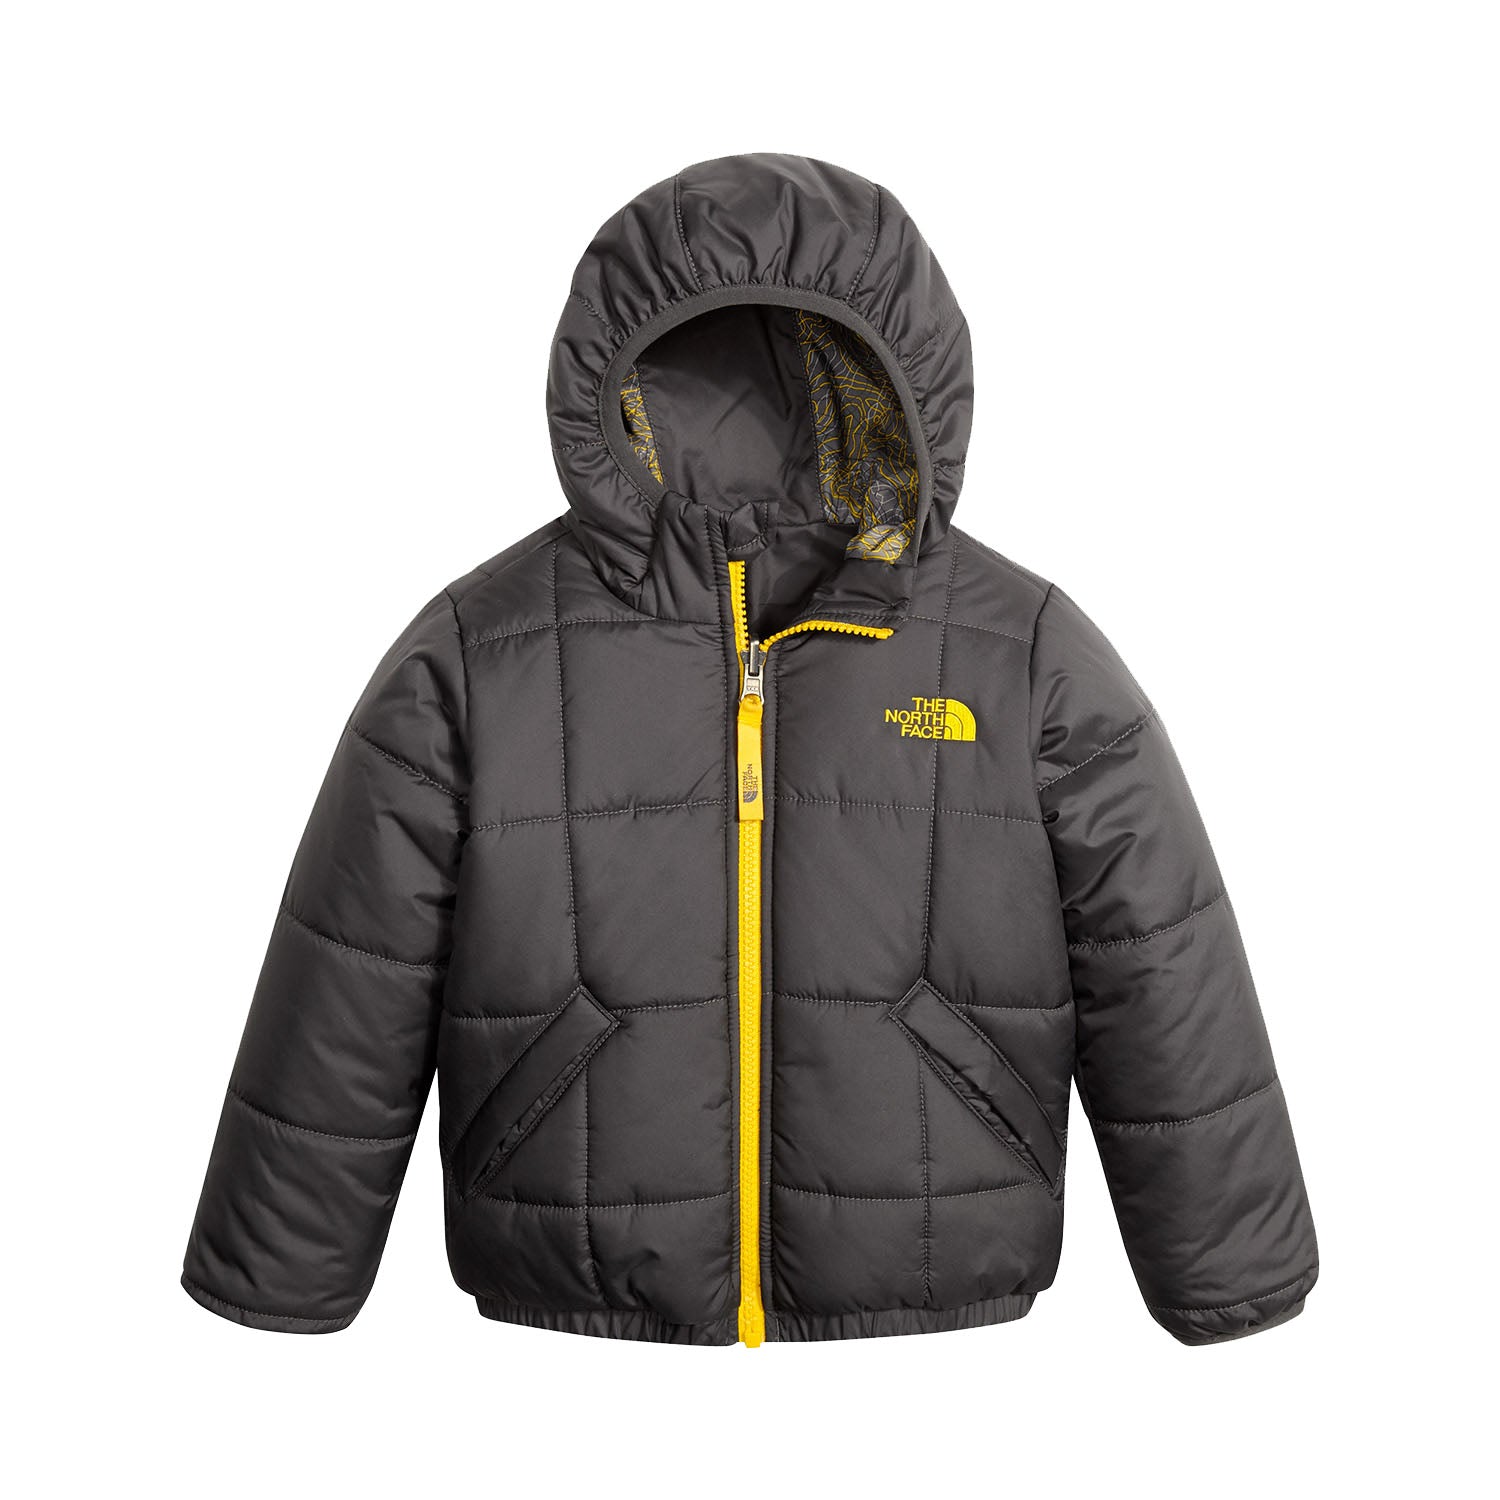 The North Face Toddler Boy's Reversible Perrito Jacket | The Last Hunt